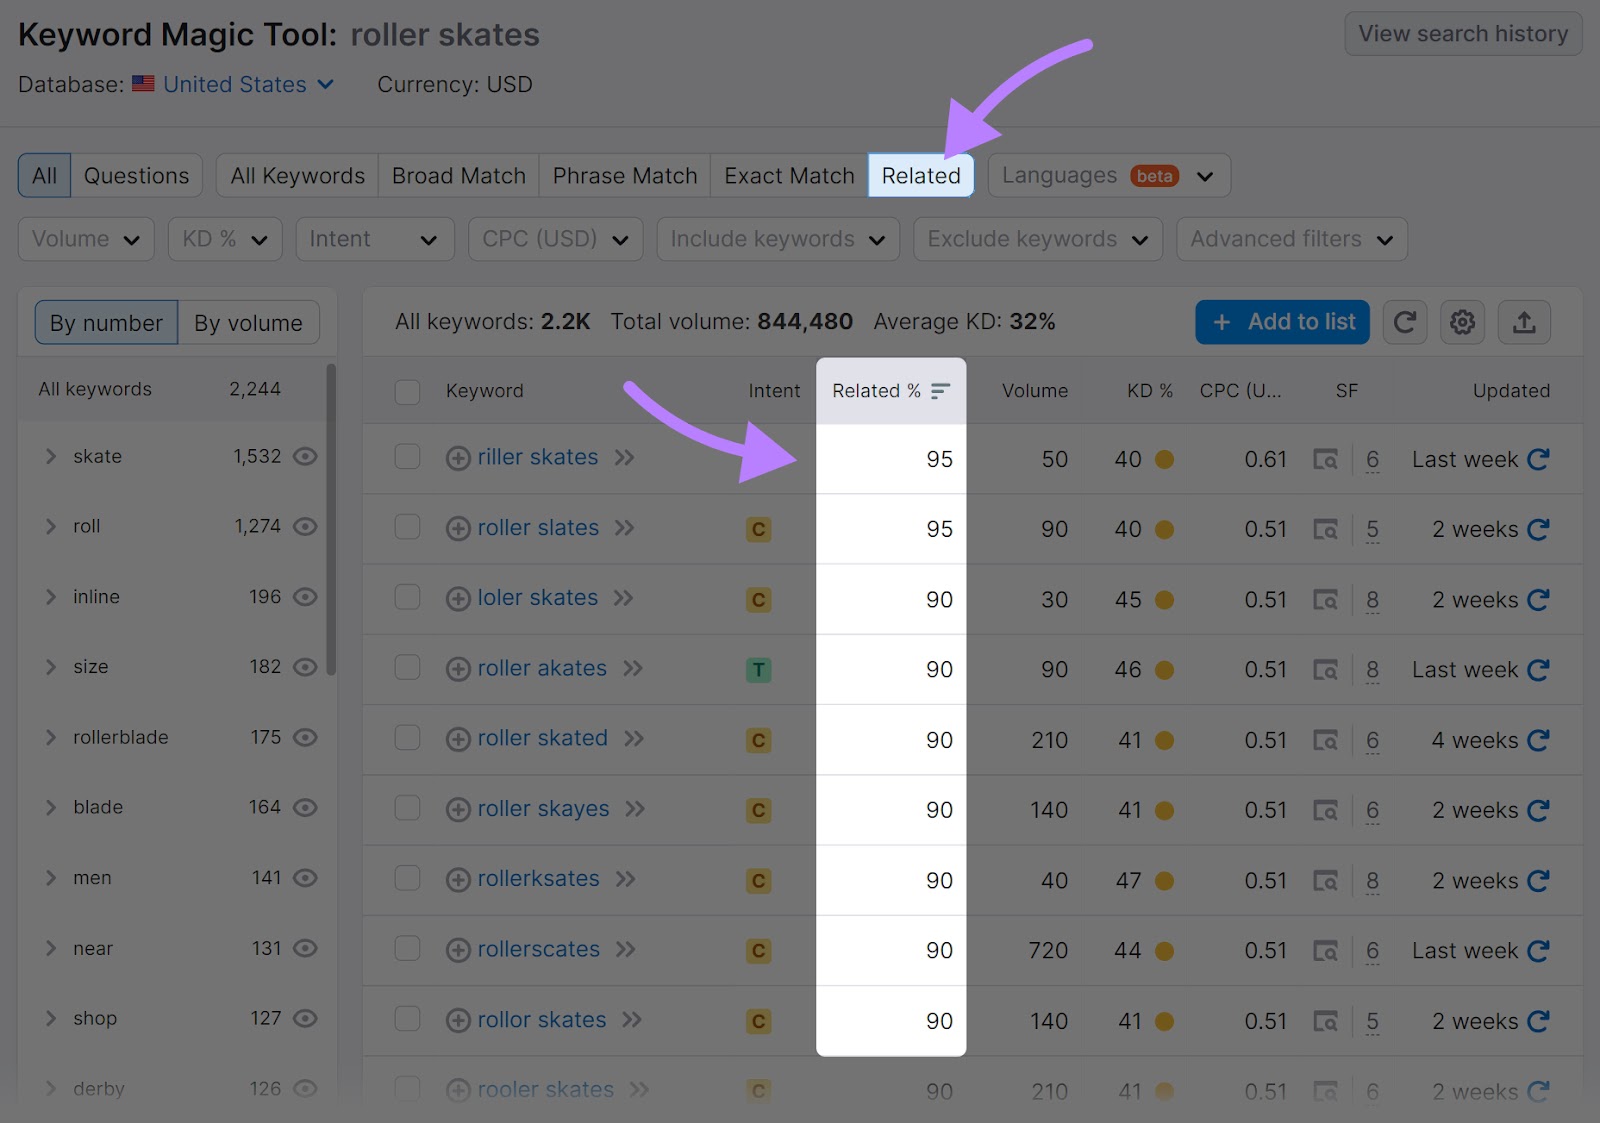 Keyword Magic Tool table with "Related" metric highlighted